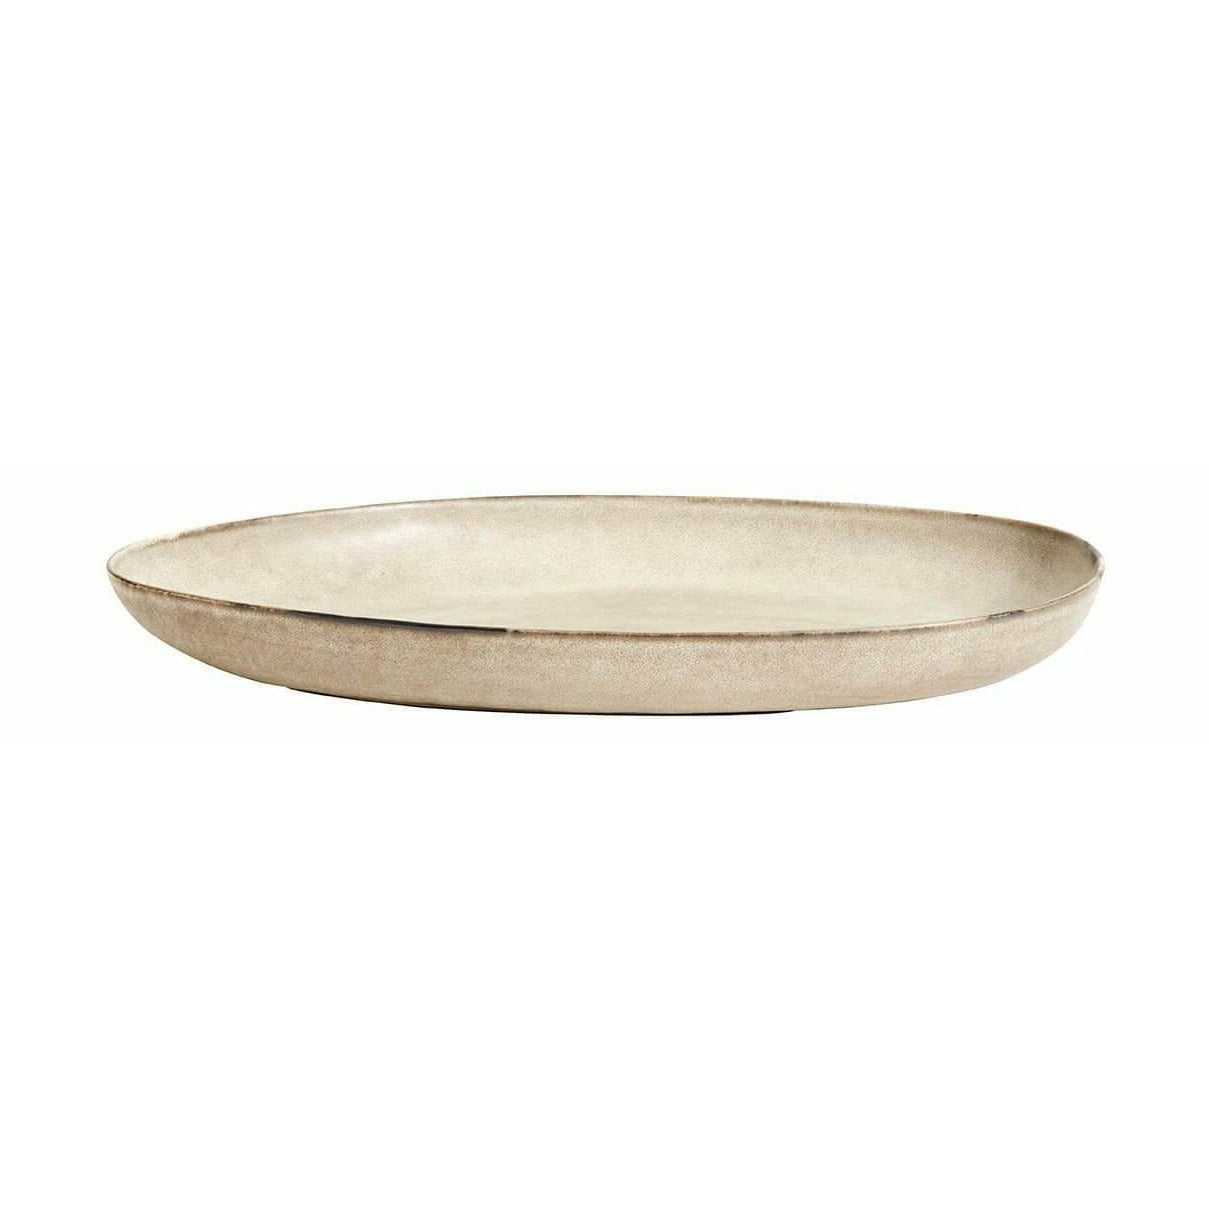 Mame Mame Serving Plate Oster Oyster, 43cm